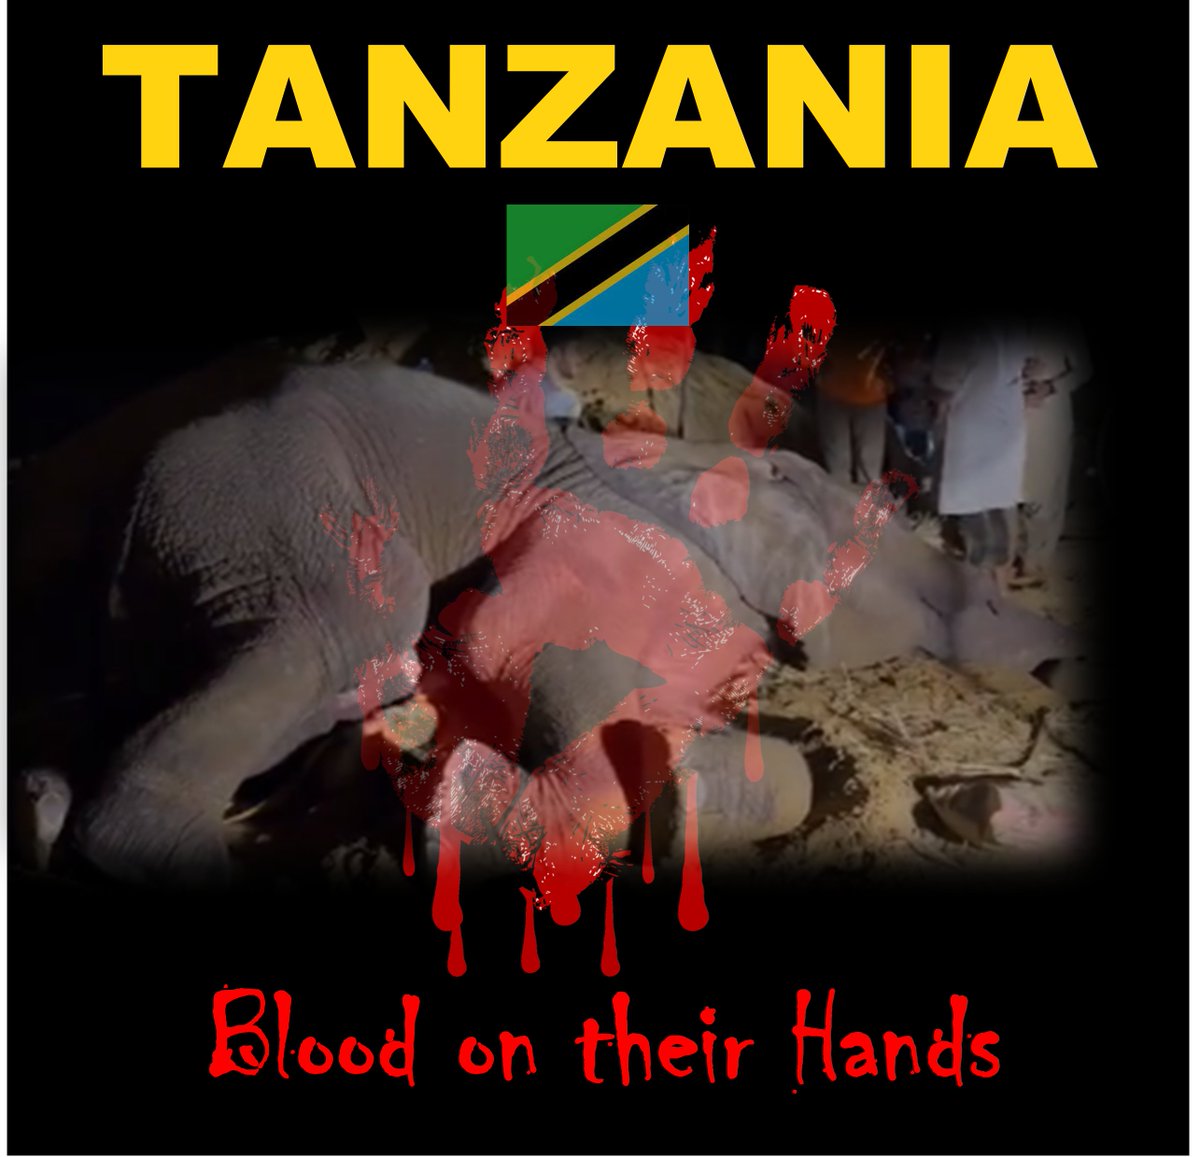 Tanzania also has blood on their hands! They callously ripped elephant calves from their herd killing their mothers & sold them for profit to a state 🇵🇰 incapable of caring for them! @TZTawa @SuluhuSamia #Tanzania #RIPNoorJehan